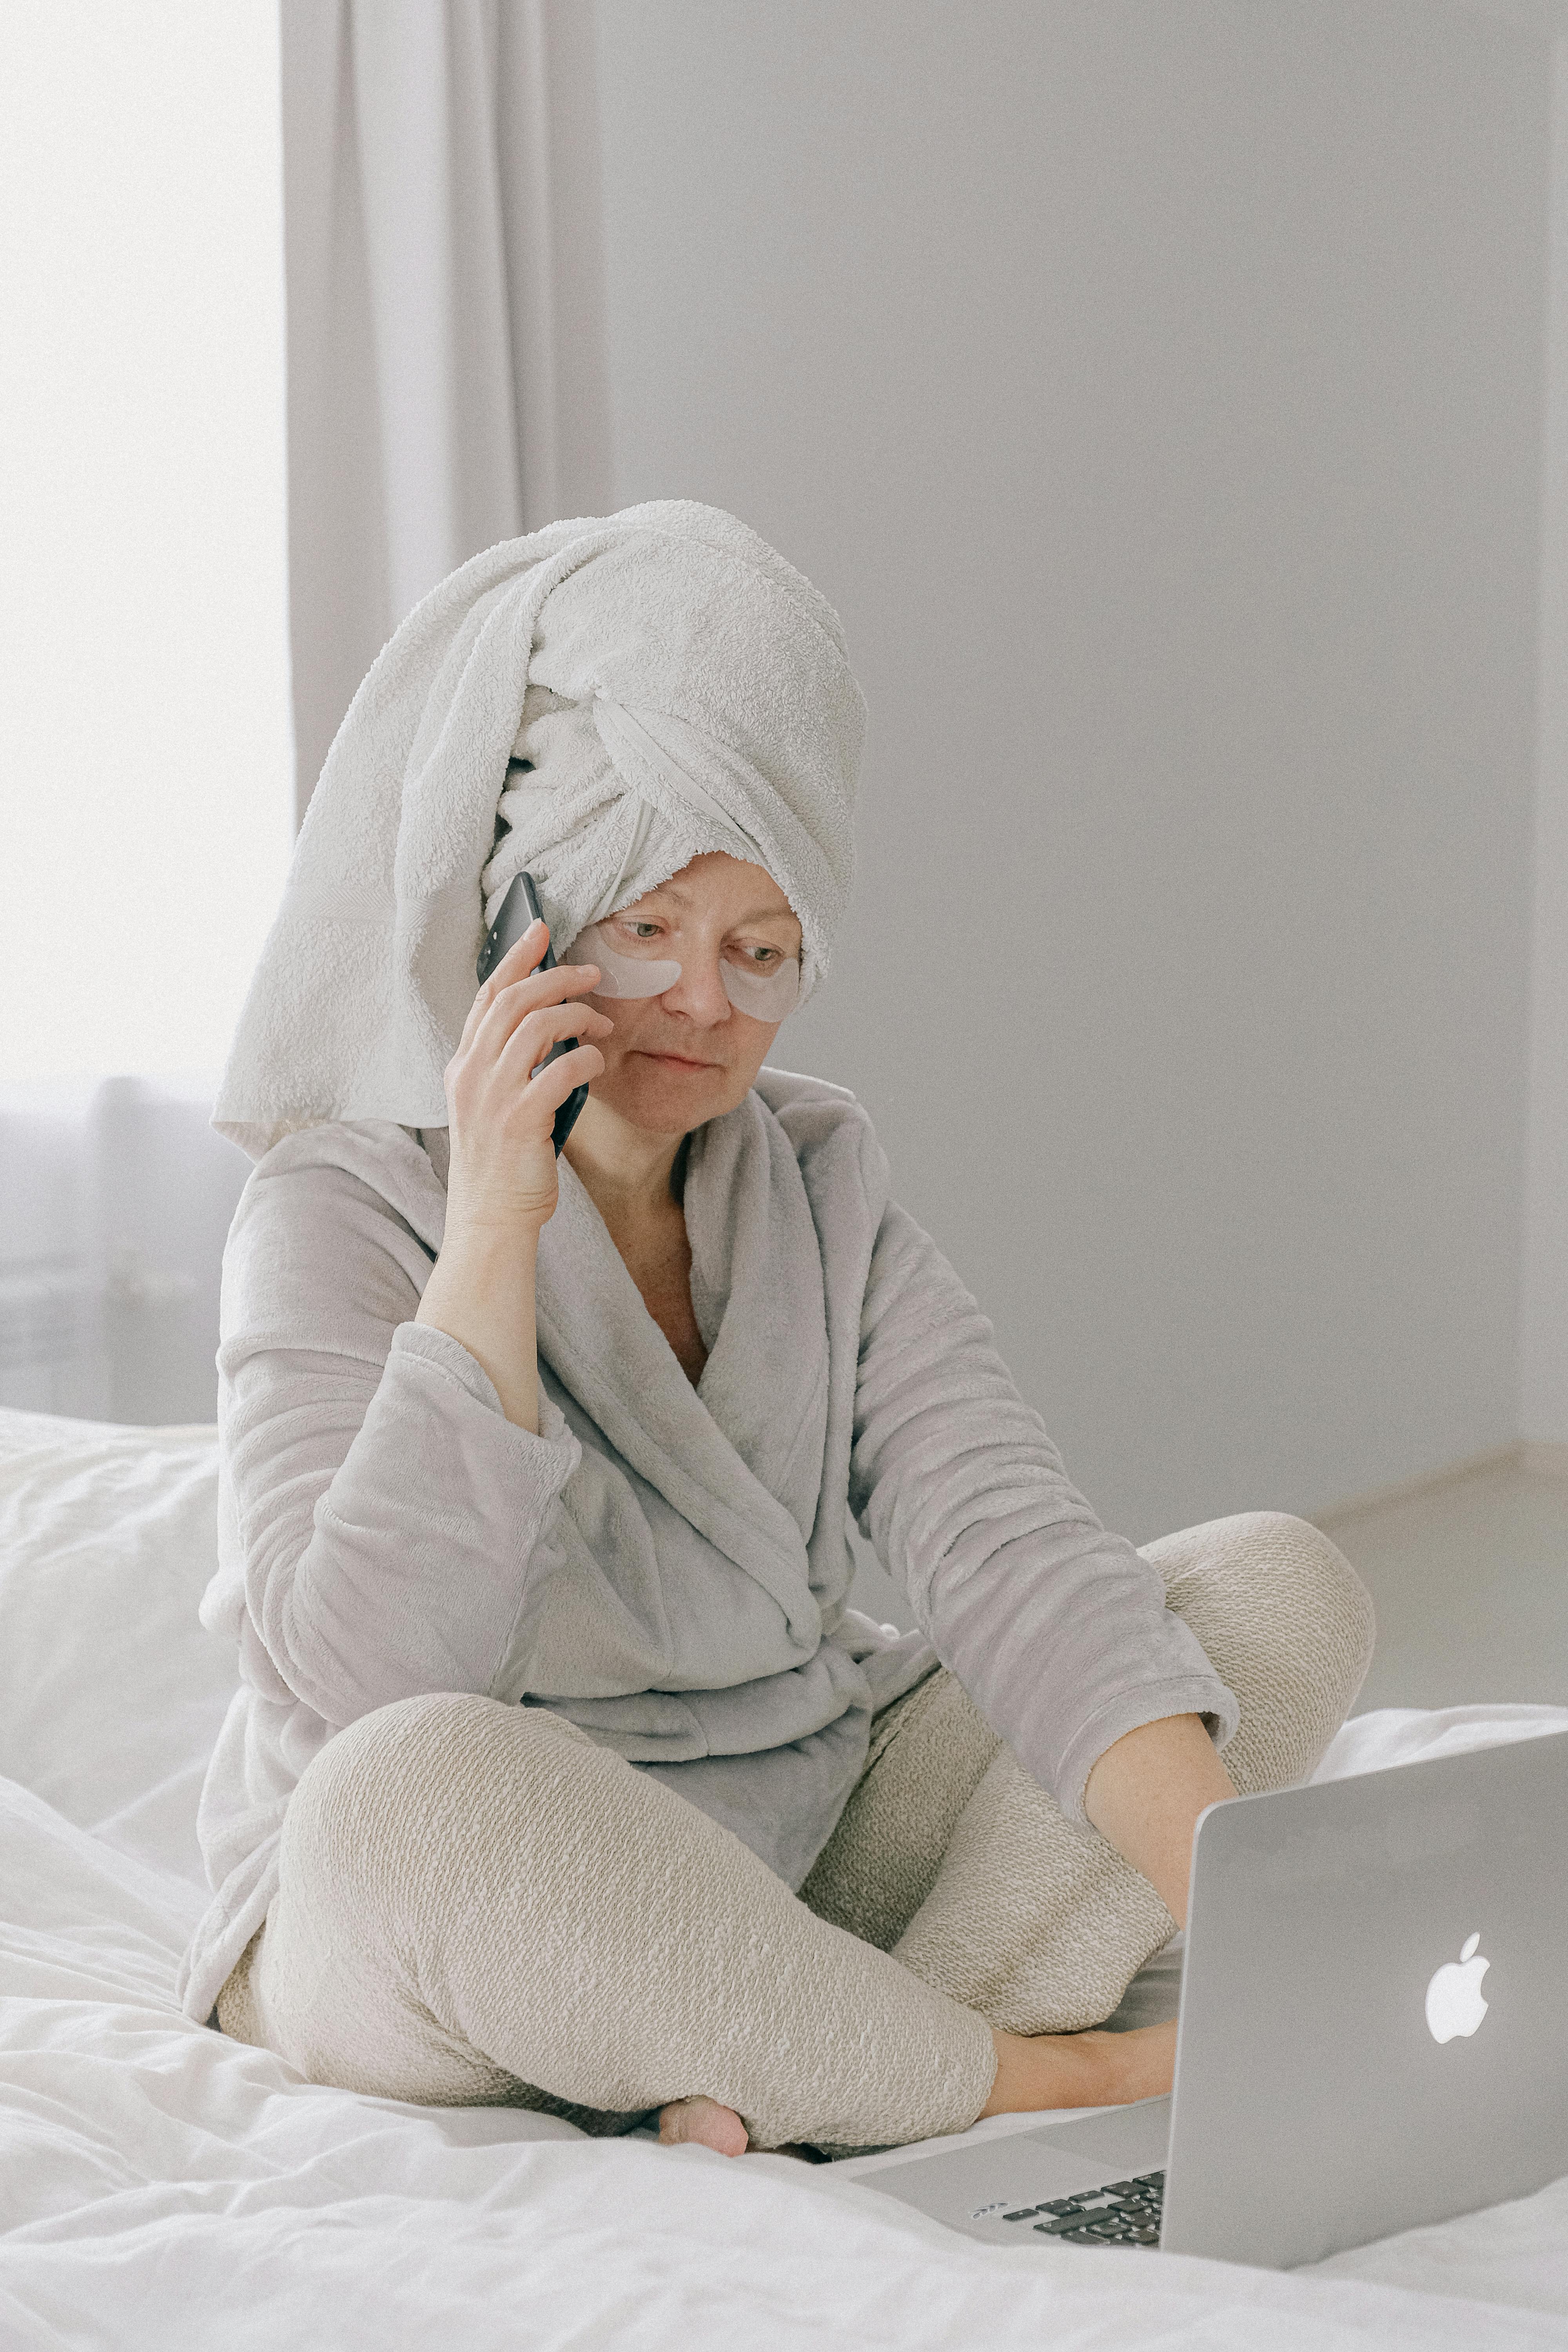 A woman in her gown and pajamas on the phone and laptop | Source: Pexels